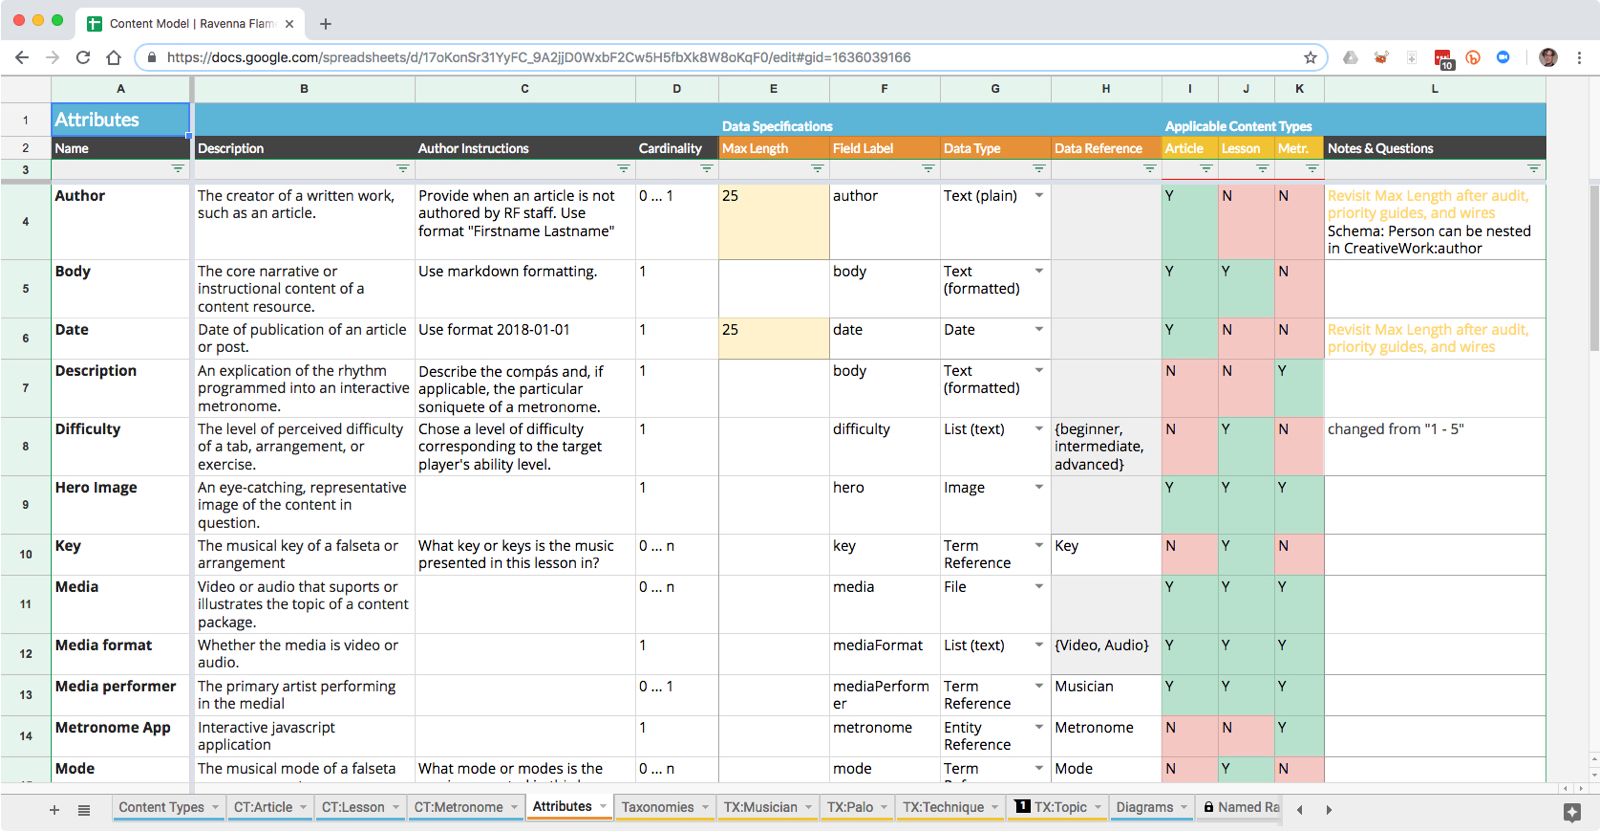 A screenshot of a spreadsheet depiction of Ravenna Flamenco content attributes